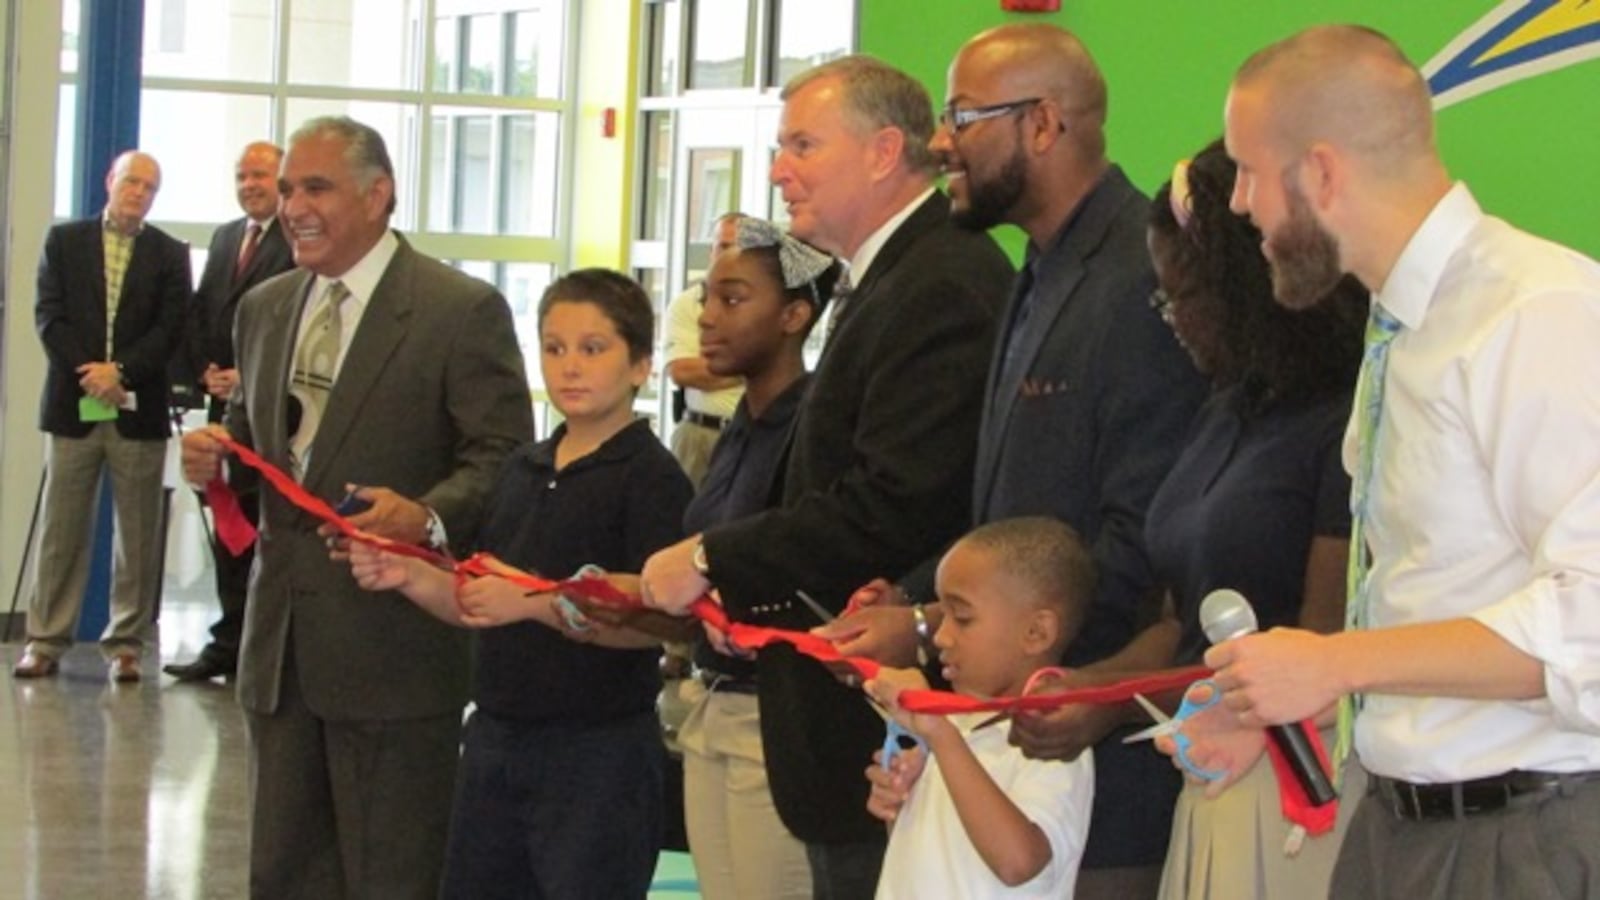 Then-Mayor Greg Ballard helps cut the ribbon for the opening of Vision Academy in 2014. Like many new charter schools, it had low test scores in its first year.